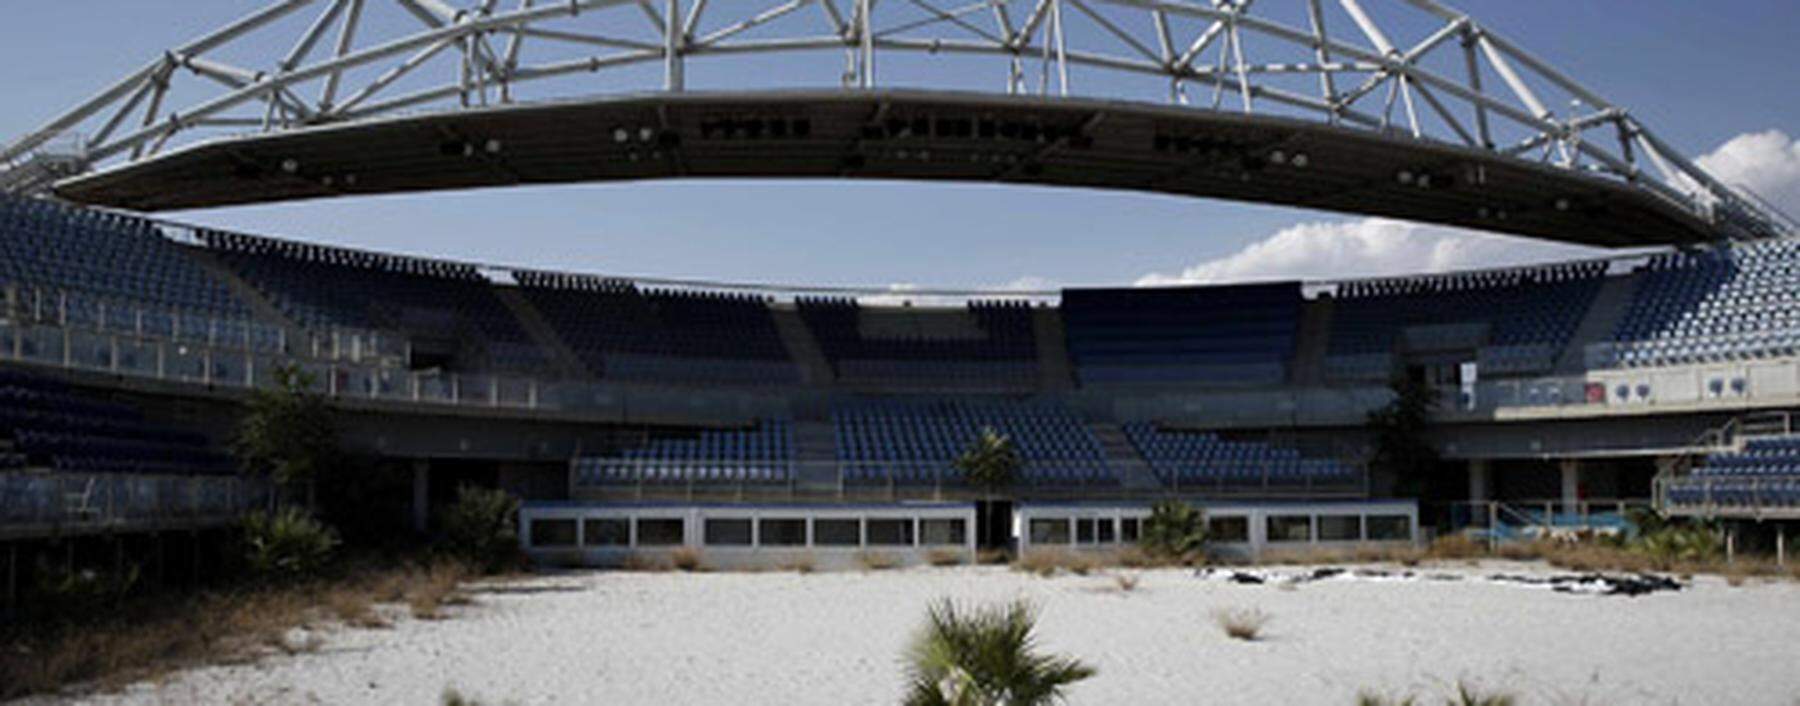 The abandoned stadium which hosted the beach volleyball competition during the Athens 2004 Olympic Games is seen south of Athens